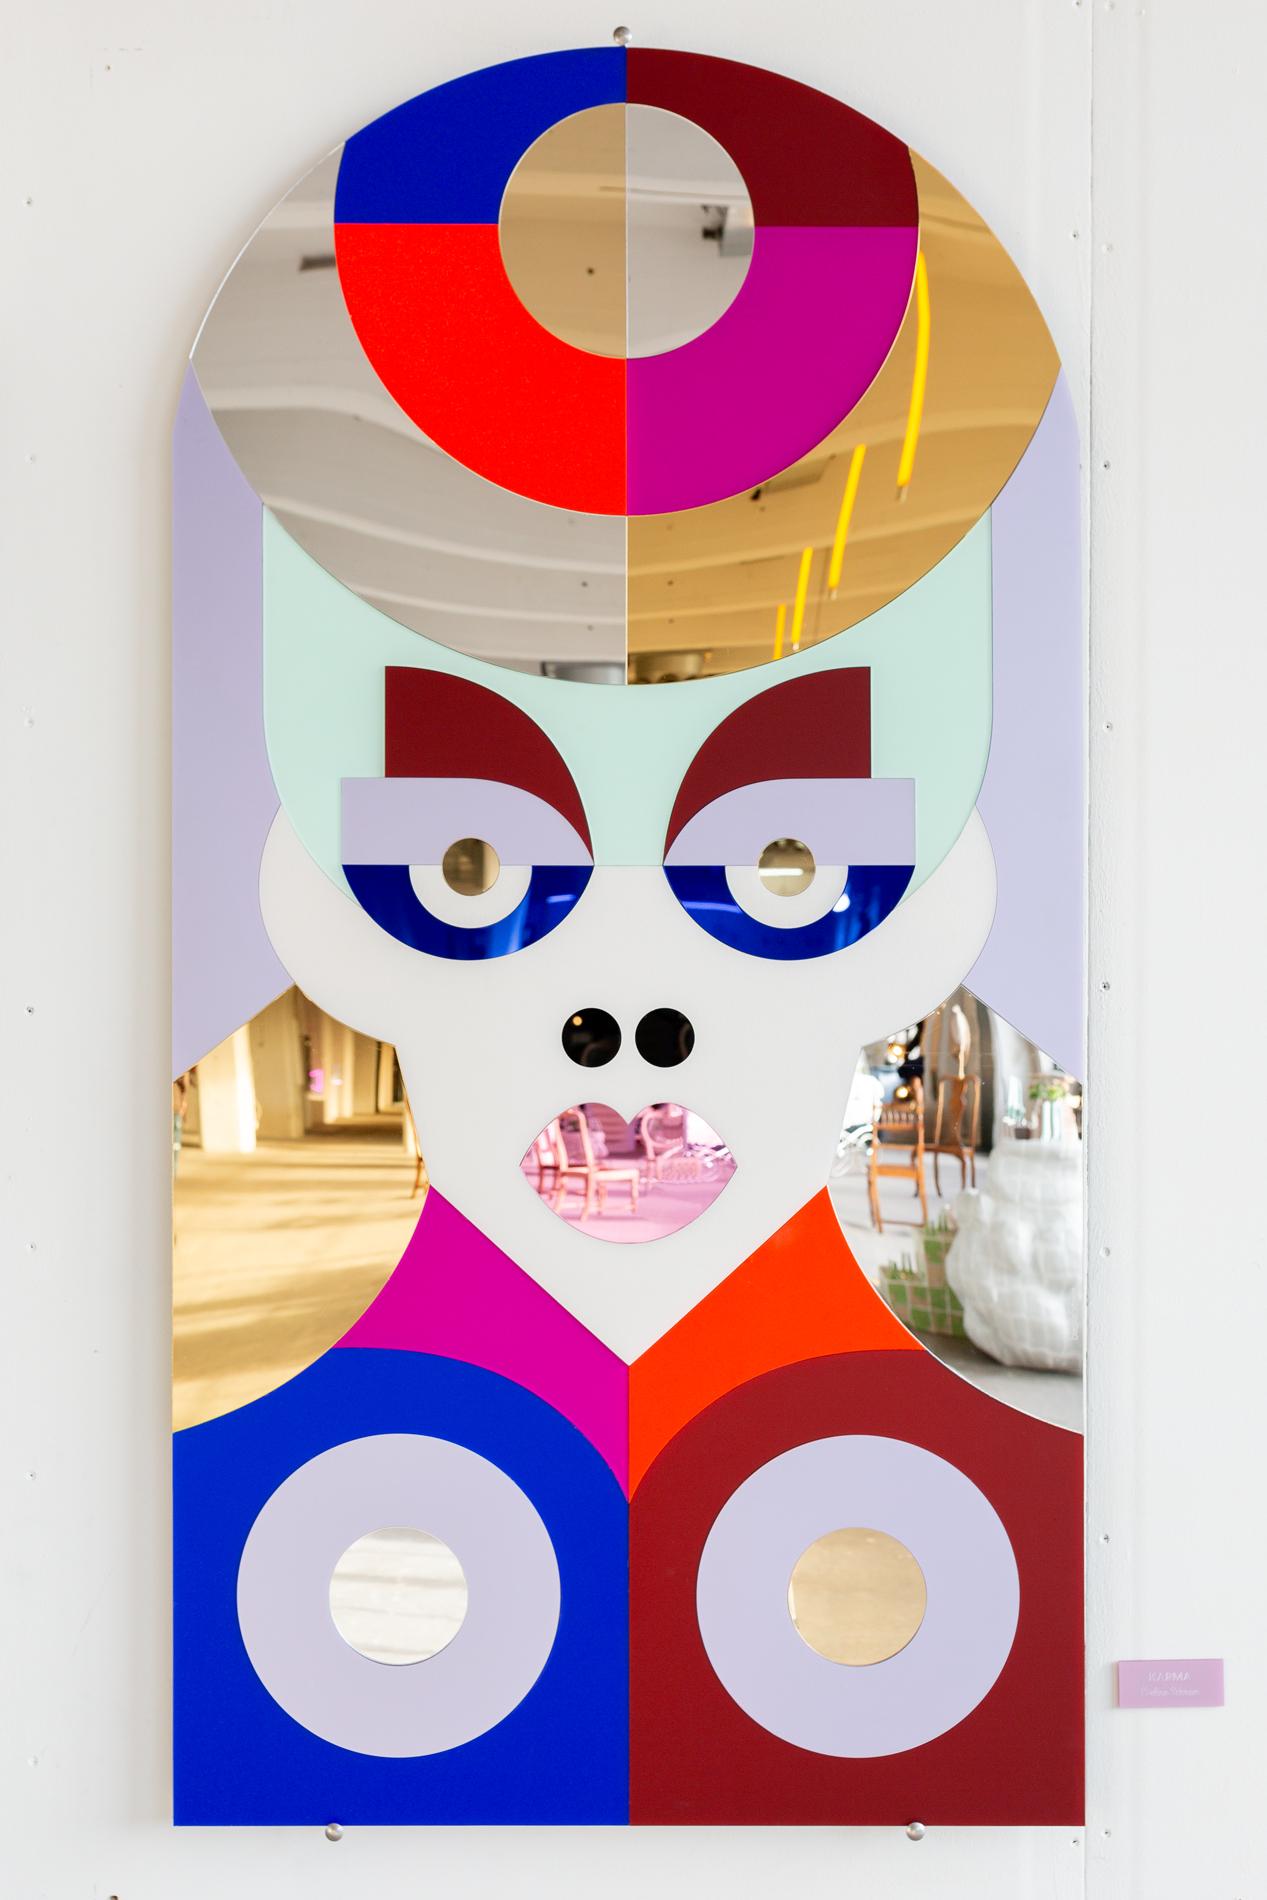 Karma is a 150cm tall colorful mirror artwork designed and created by Eveline Schram. The work is entirely made of a diverse array of plexiglass materials, including reflective colored mirror-, frost-, metallic- and stonelook surfaces. The piece can